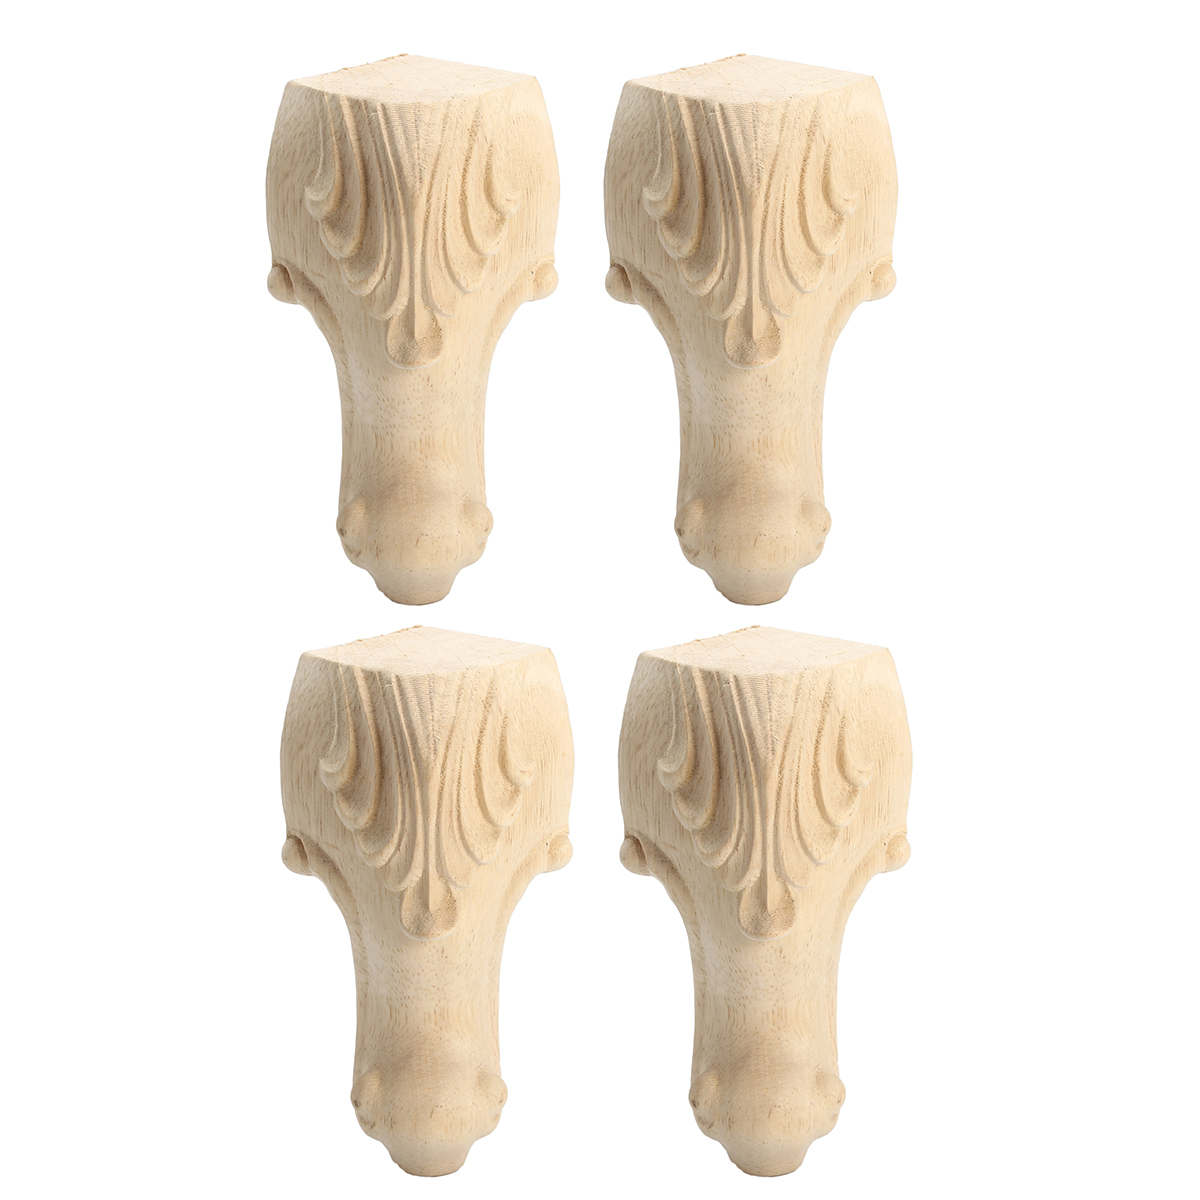 

4Pcs Solid Wood Carved Furniture Foot Leg TV Cabinet Couch Sofa Chair Cap